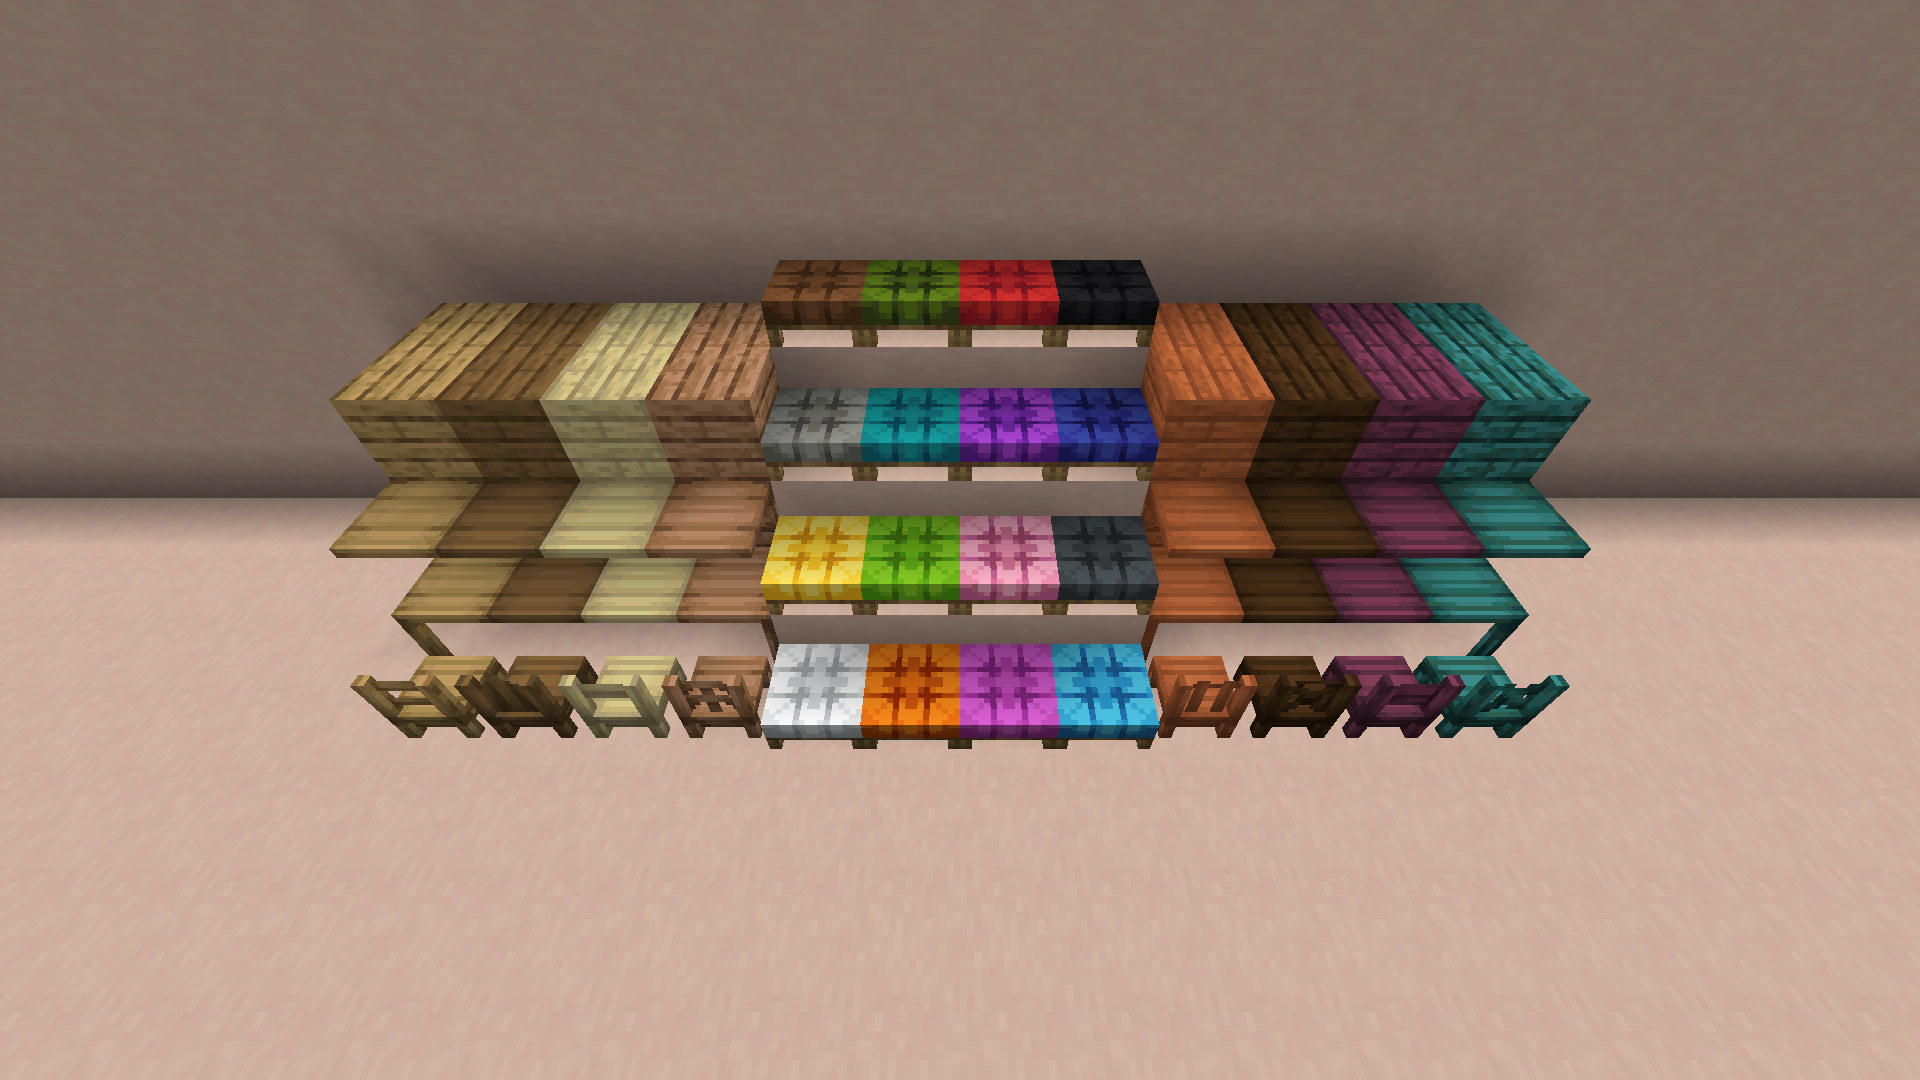 Another minecraft. Another Furniture майнкрафт. Another Furniture 1.19.2. Another-Furniture-1.2.2-Forge-1.18.2. Мод на мебель 1.20.1 another Furniture.